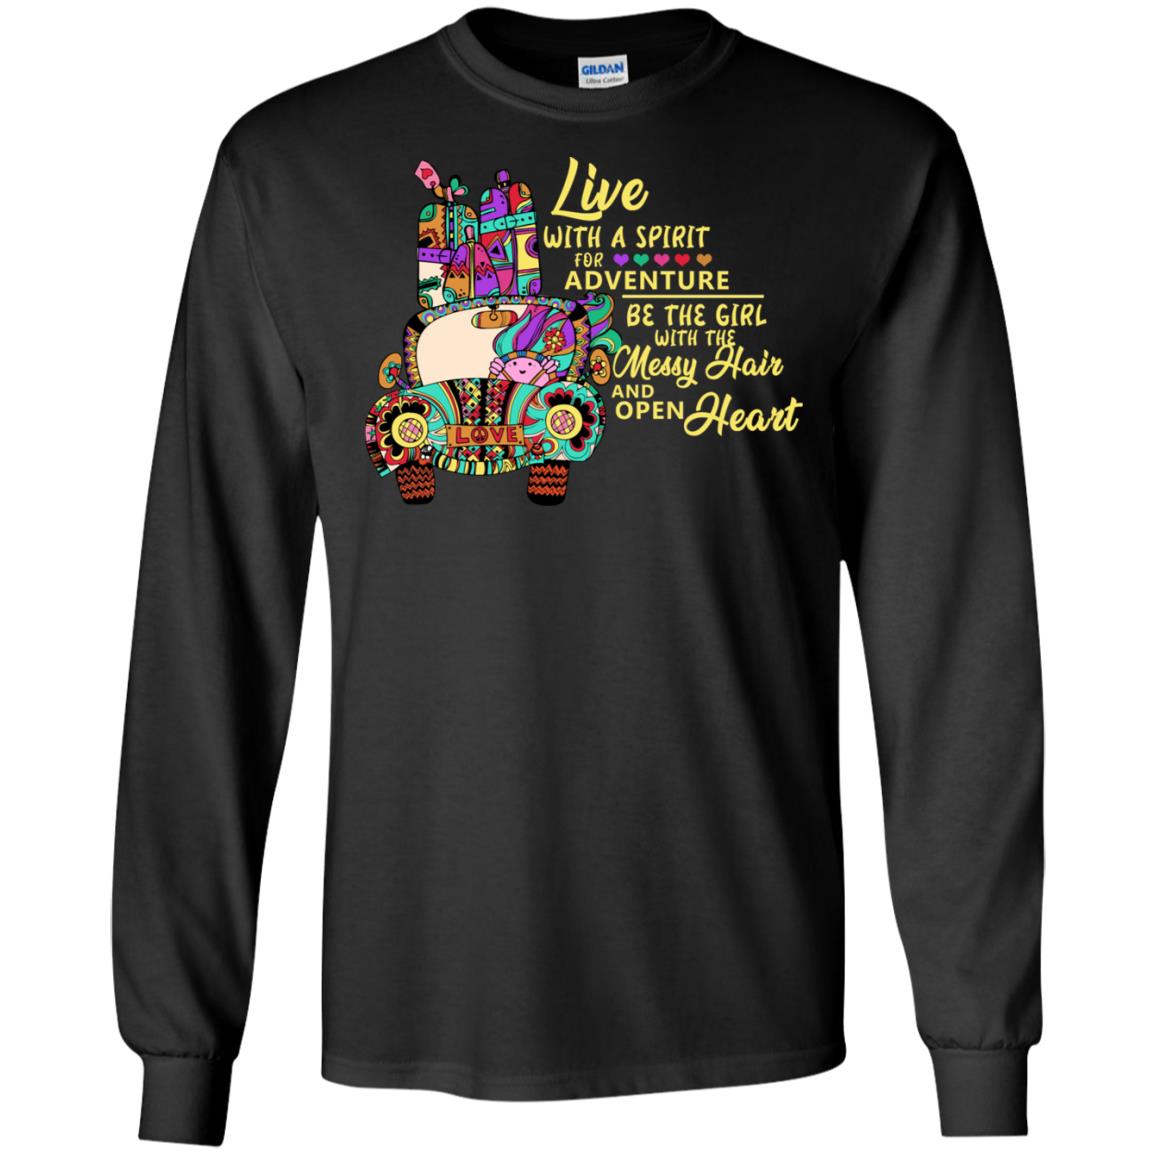 Live With A Spirit For Adventure Be The Girl With The Messy Hair And Open Heart ShirtG240 Gildan LS Ultra Cotton T-Shirt